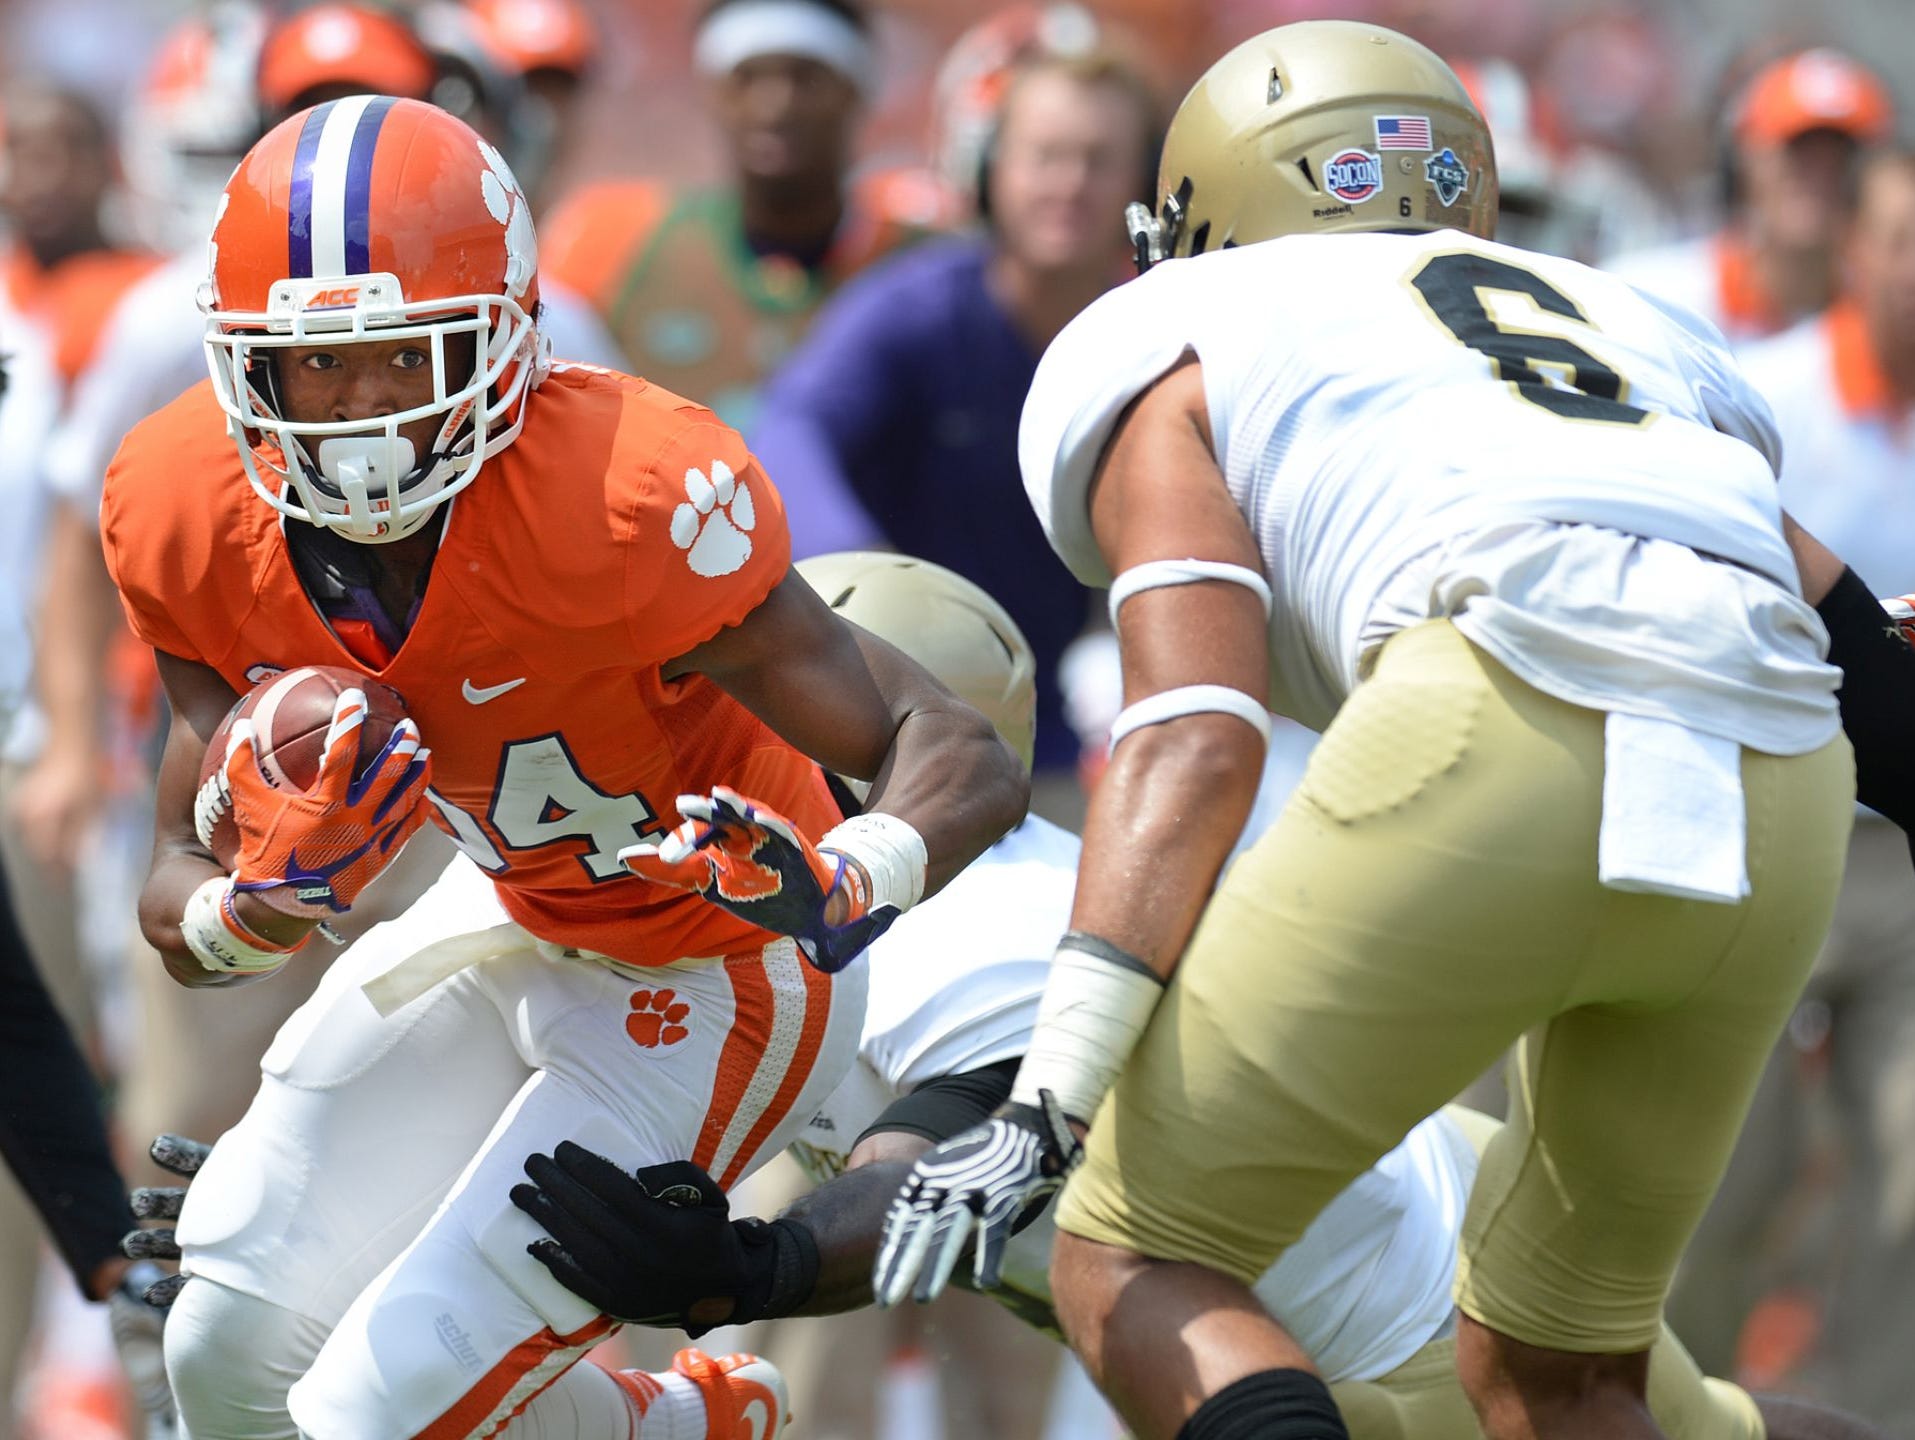 Clemson receiver Ray-Ray McCloud will not require surgery after suffering a sprained knee against Florida State on Saturday.